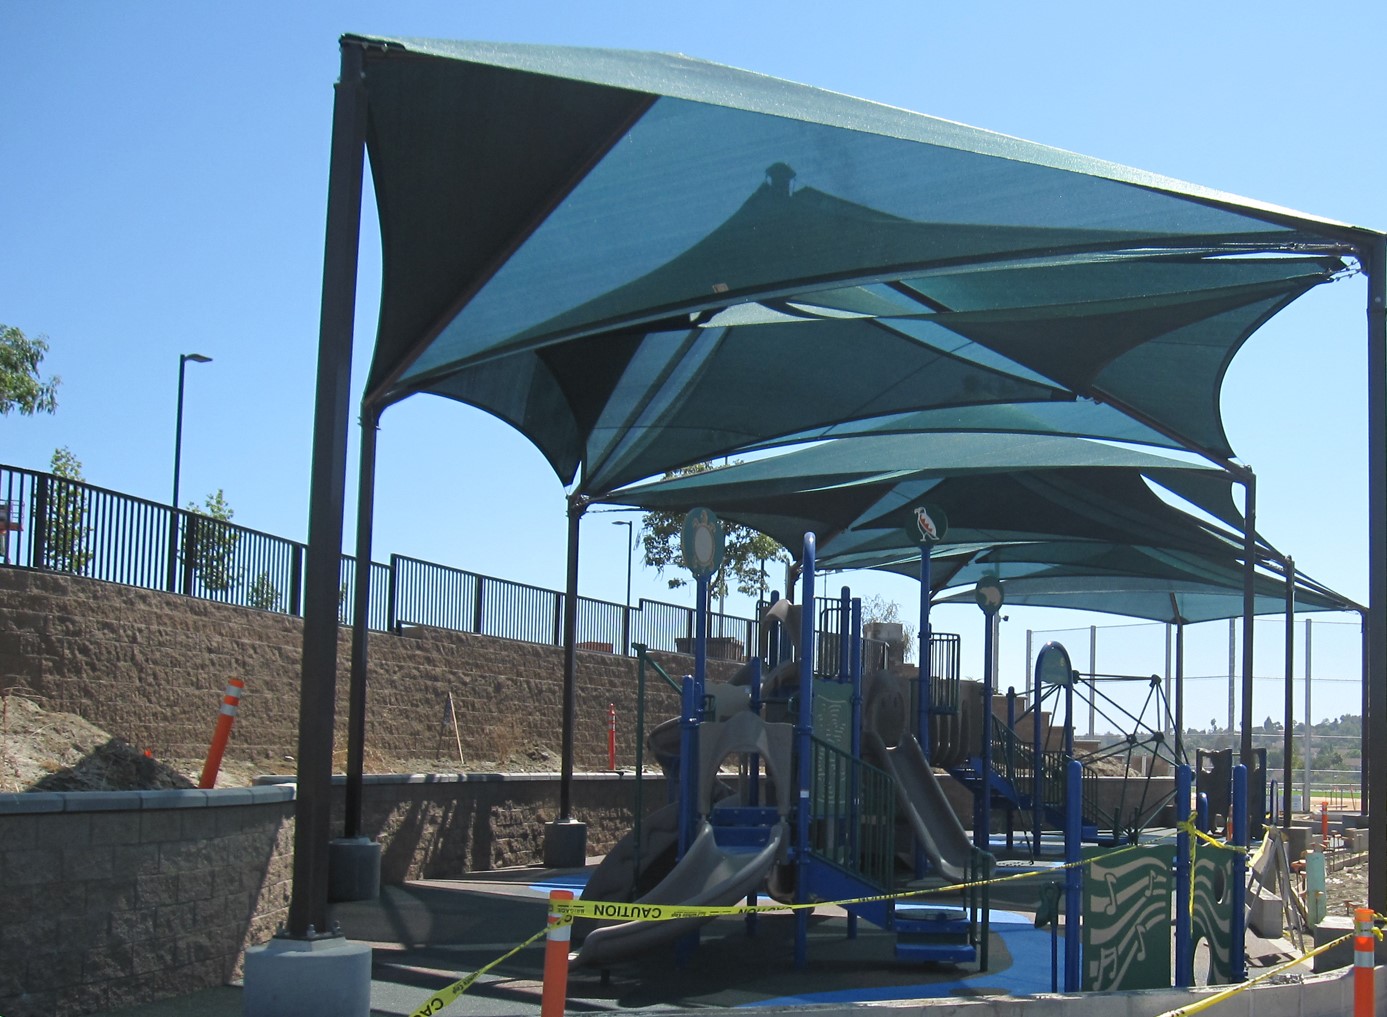 green shades covering playground equipment